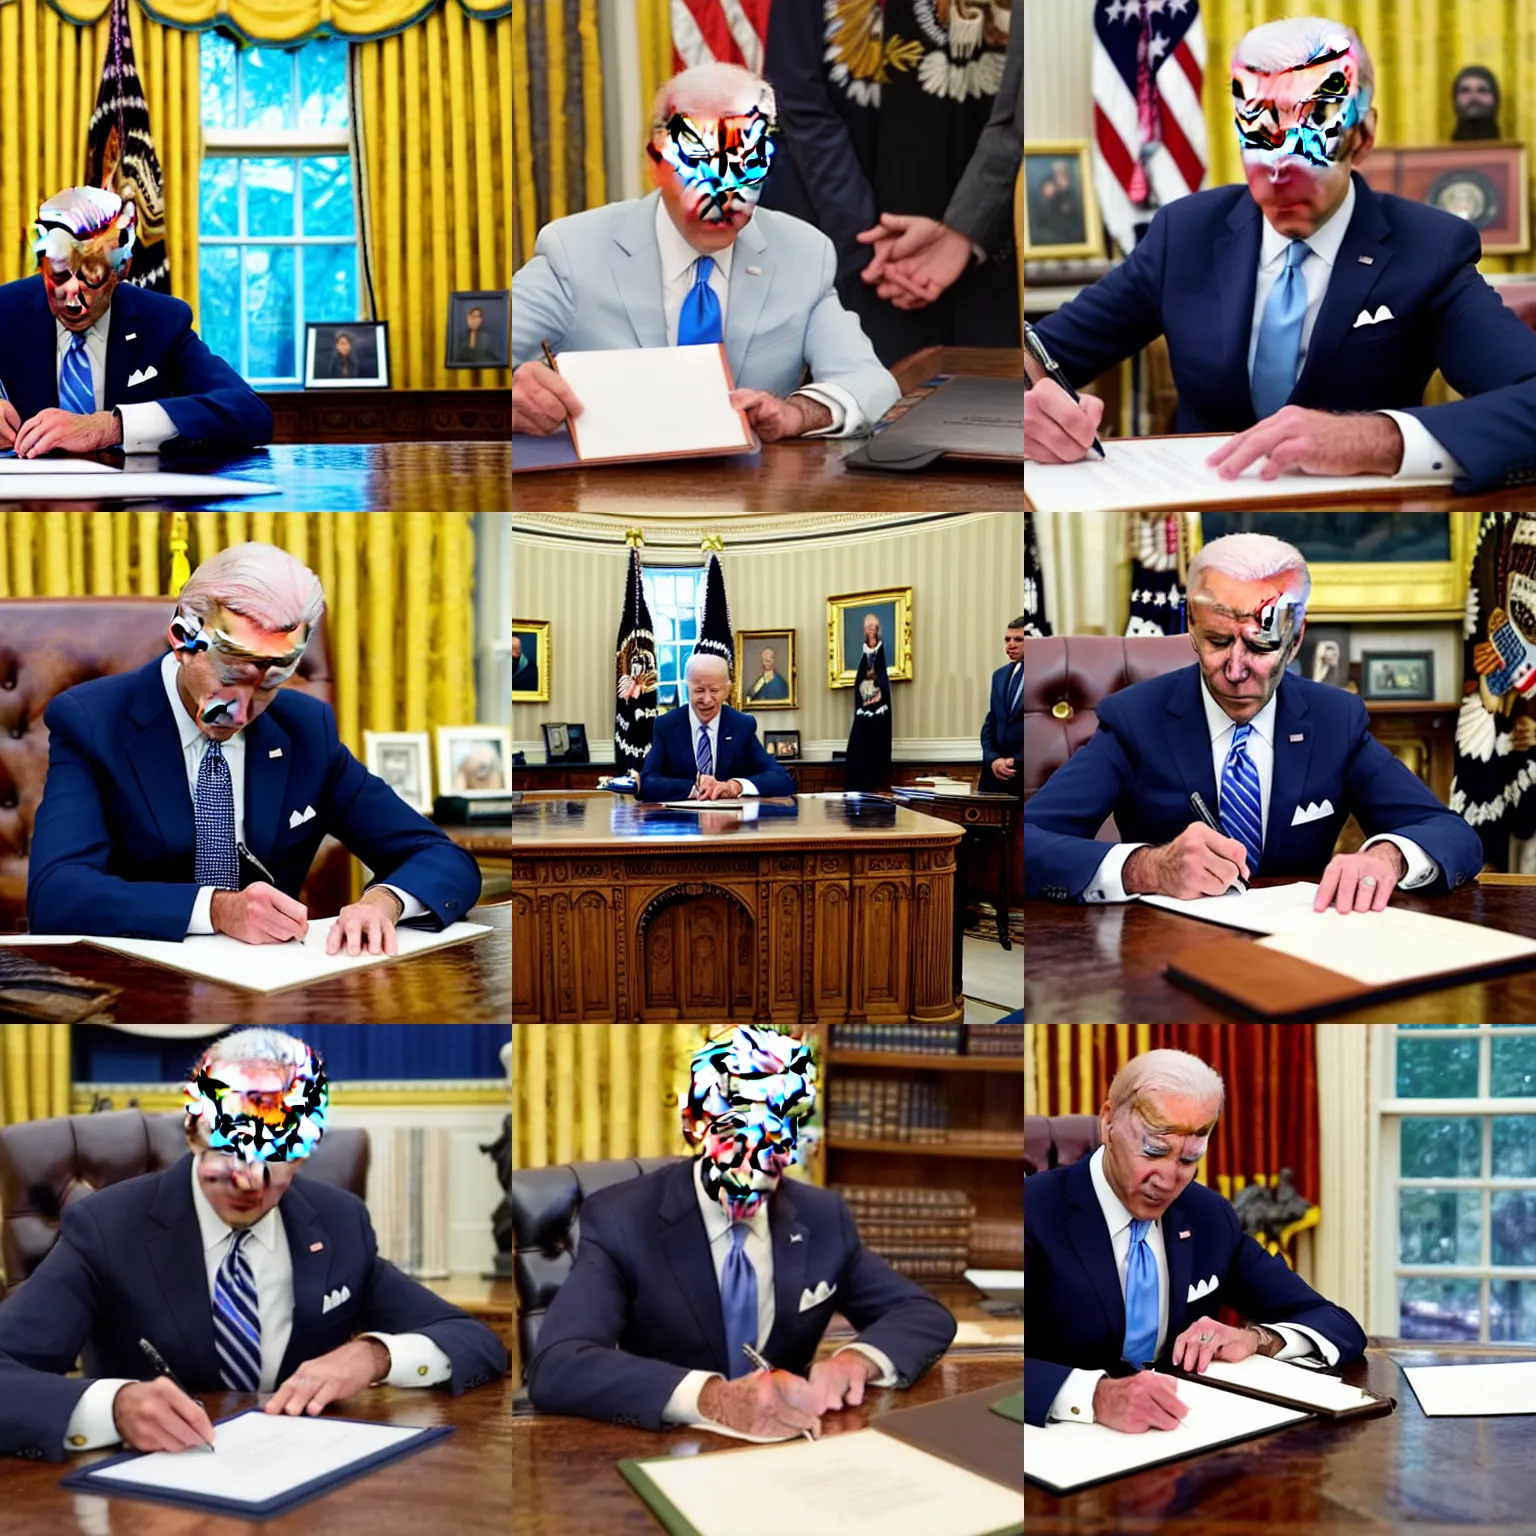 Prompt: President Biden signing the executive order to forgive student loans in the oval office